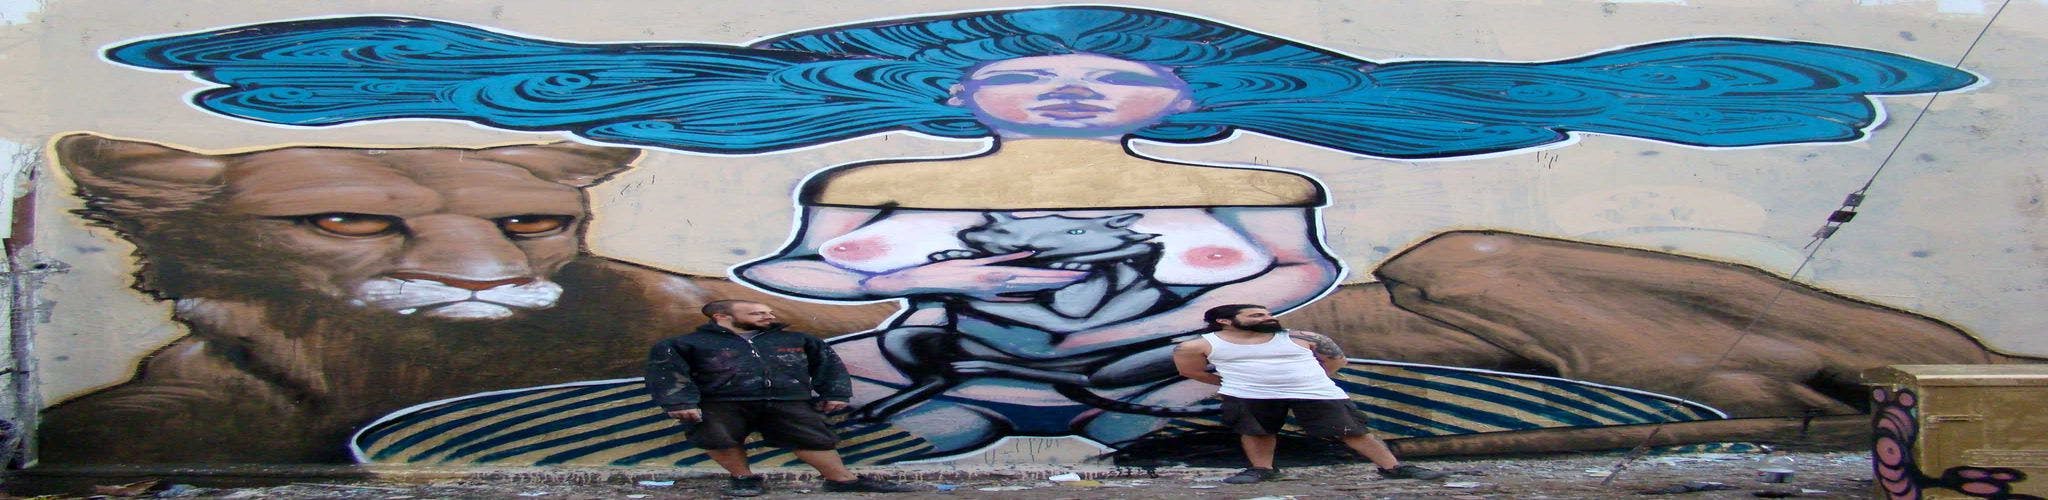  by LEAN FRIZZERA in Buenos Aires